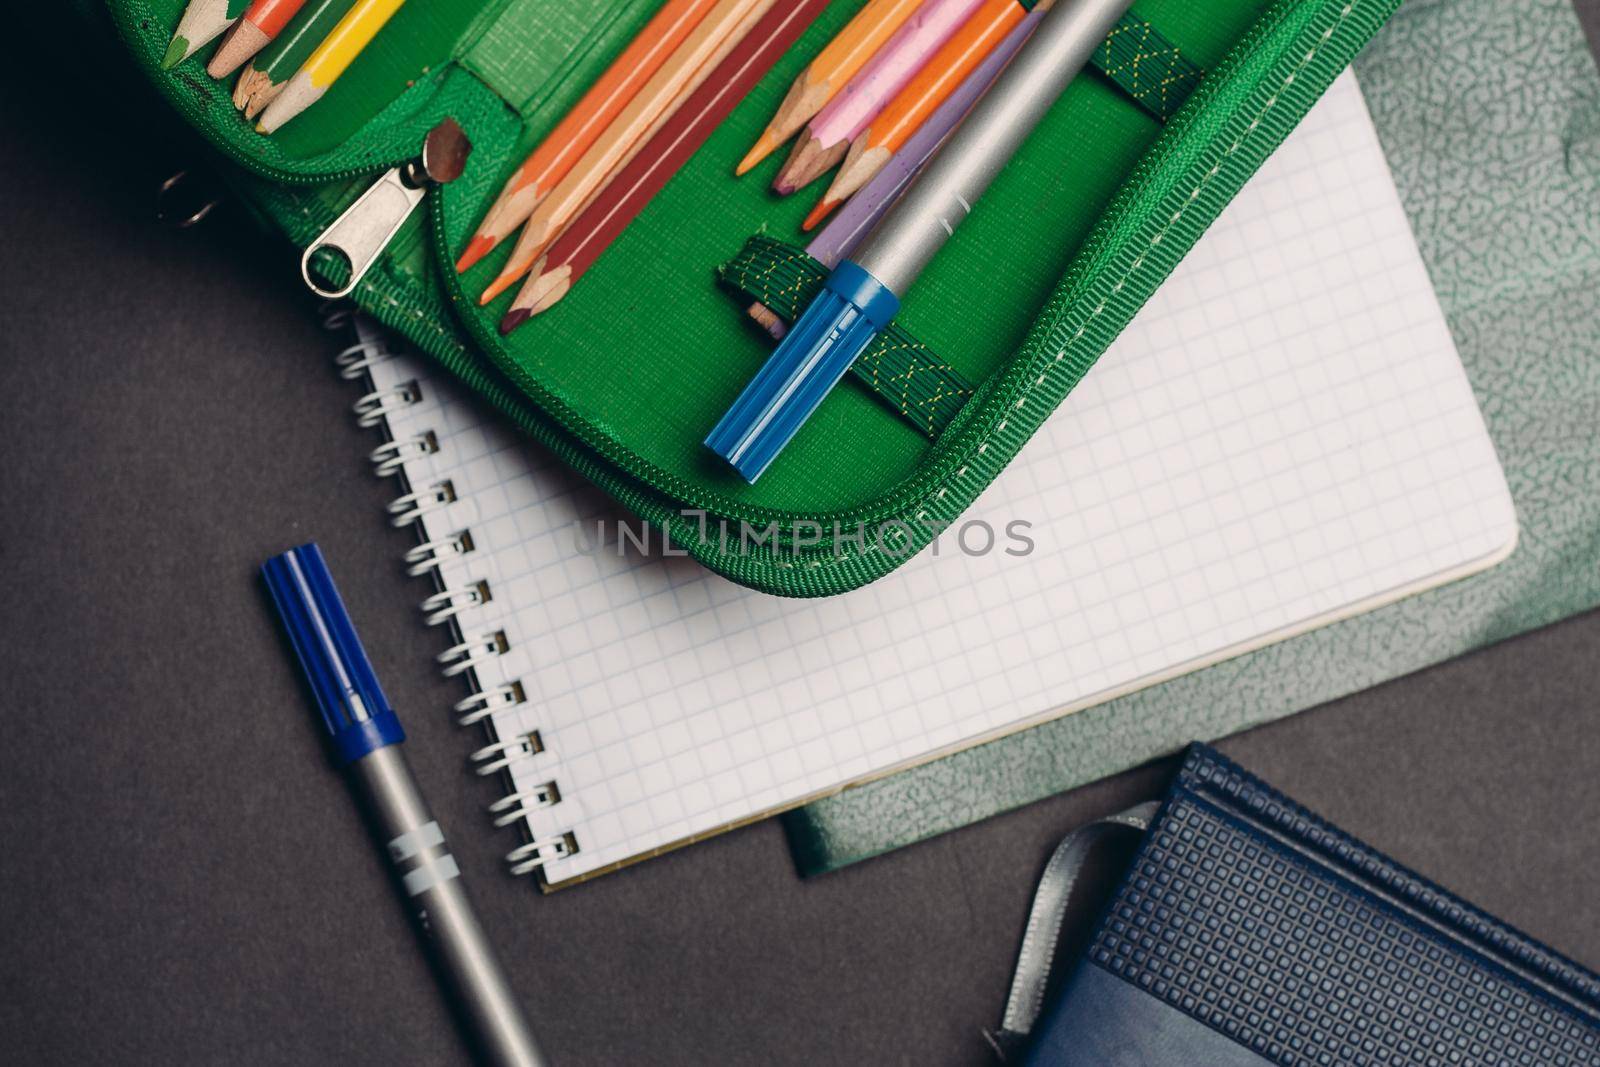 green pencil case with pencils design object school supplies. High quality photo